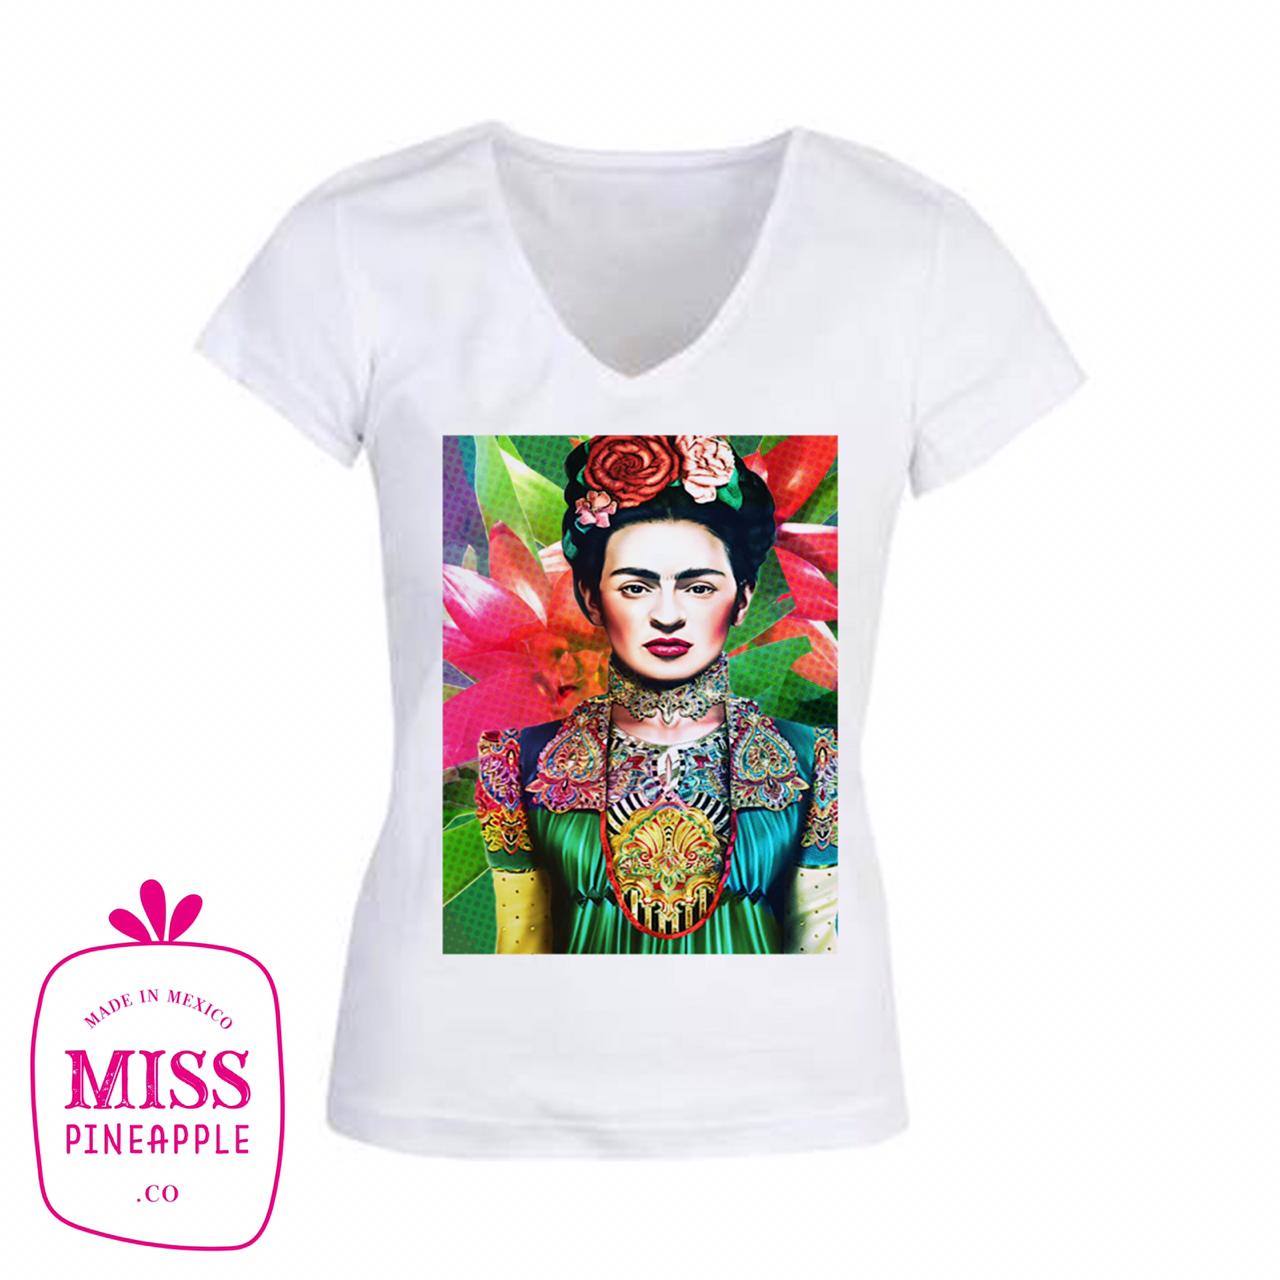 Women\'s T-Shirt FRIDA Collection KAHLO Co Miss – - Pineapple